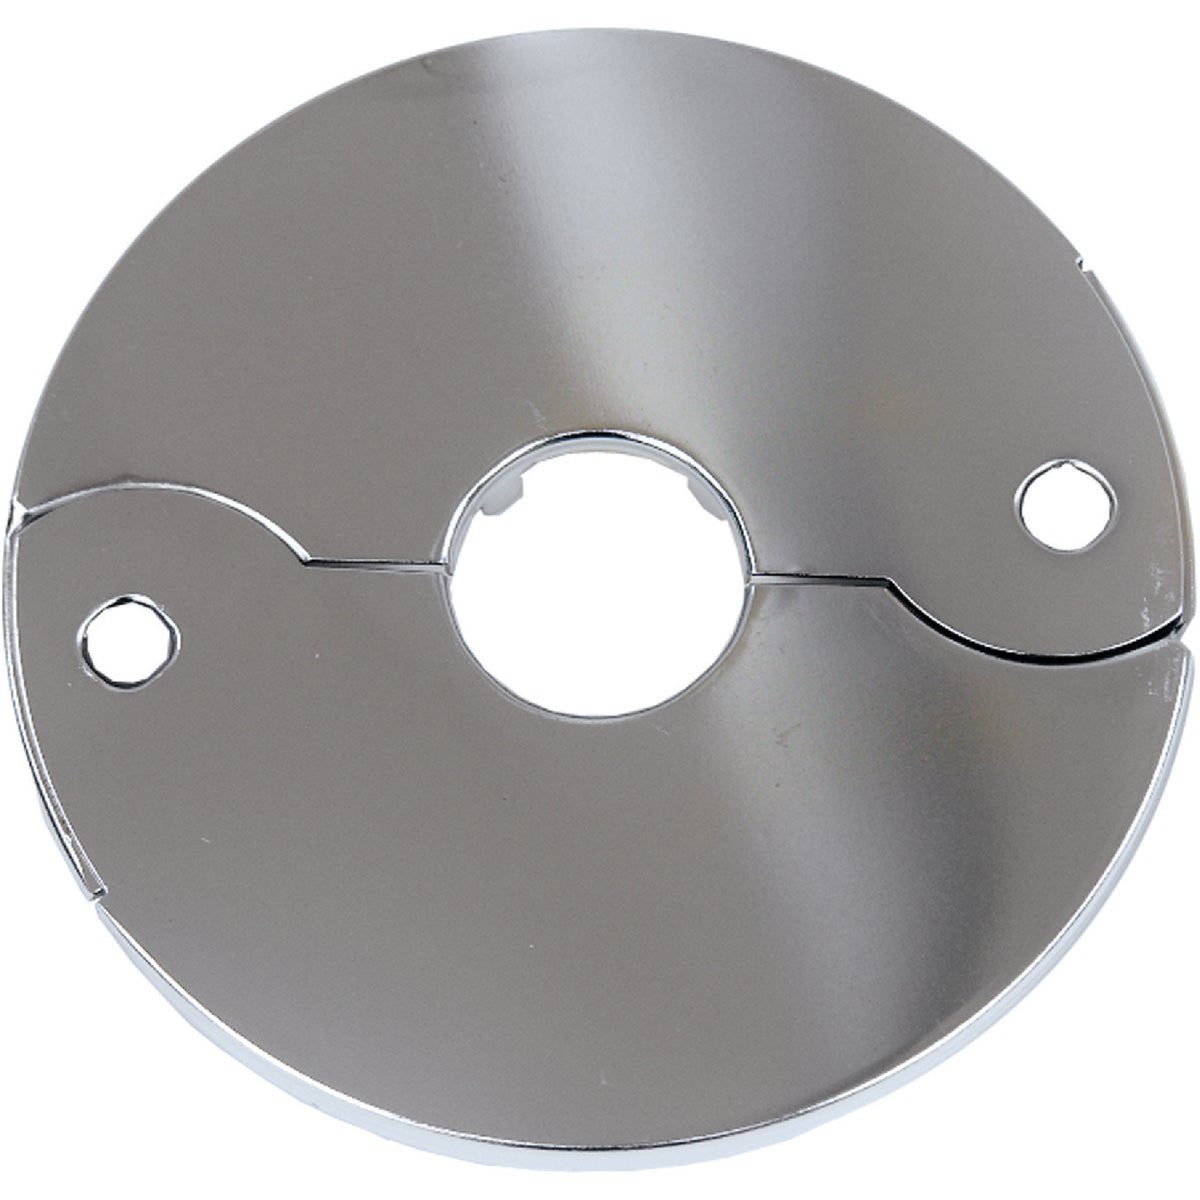 Lasco Chrome-Plated 3/8 In. IP or 1/2 Copper 5/8 In. ID Split Plate